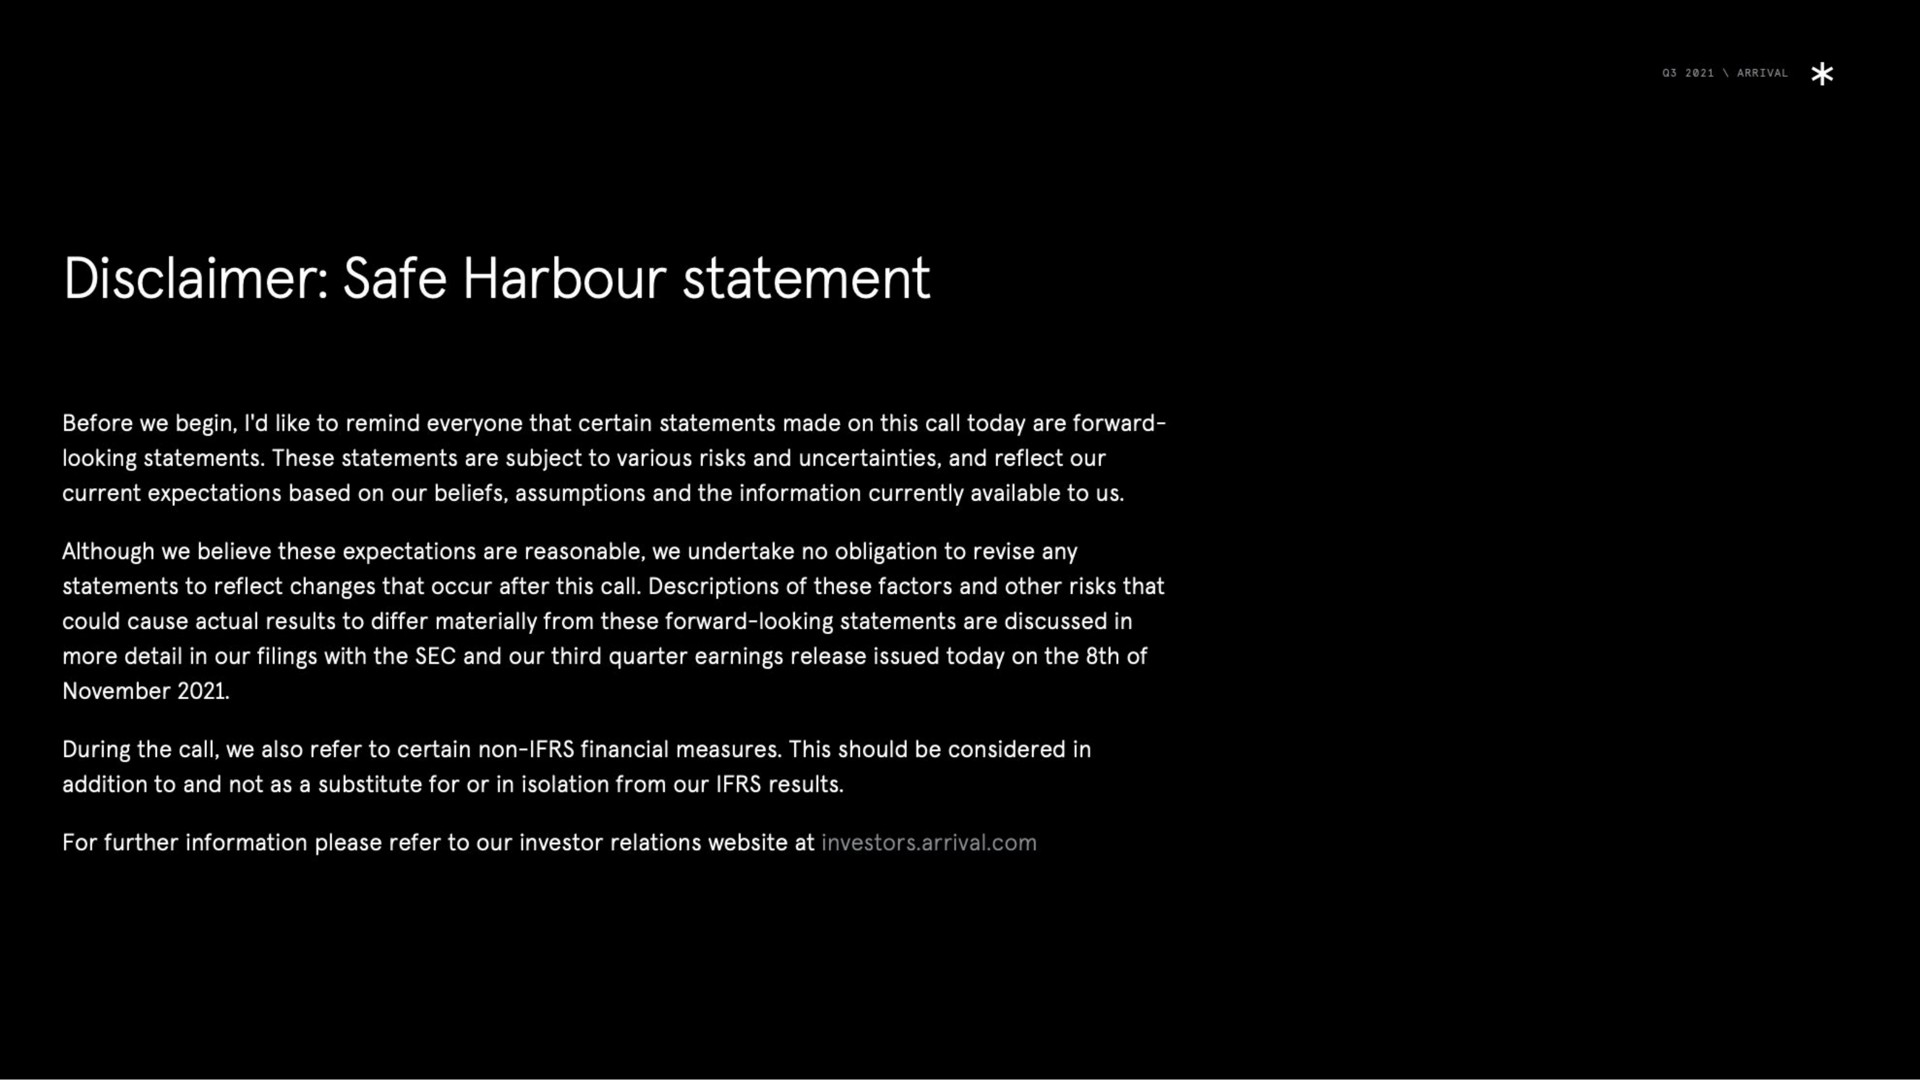 disclaimer safe harbour statement before we begin i like to remind everyone that certain statements made on this call today are forward looking statements these statements are subject to various risks and uncertainties and reflect our current expectations based on our beliefs assumptions and the information currently available to us although we believe these expectations are reasonable we undertake no obligation to revise any statements to reflect changes that occur after this call descriptions of these factors and other risks that could cause actual results to differ materially from these forward looking statements are discussed in more detail in our filings with the sec and our third quarter earnings release issued today on the of during the call we also refer to certain non financial measures this should be considered in addition to and not as a substitute for or in isolation from our results for further information please refer to our investor relations at investors arrival | Arrival